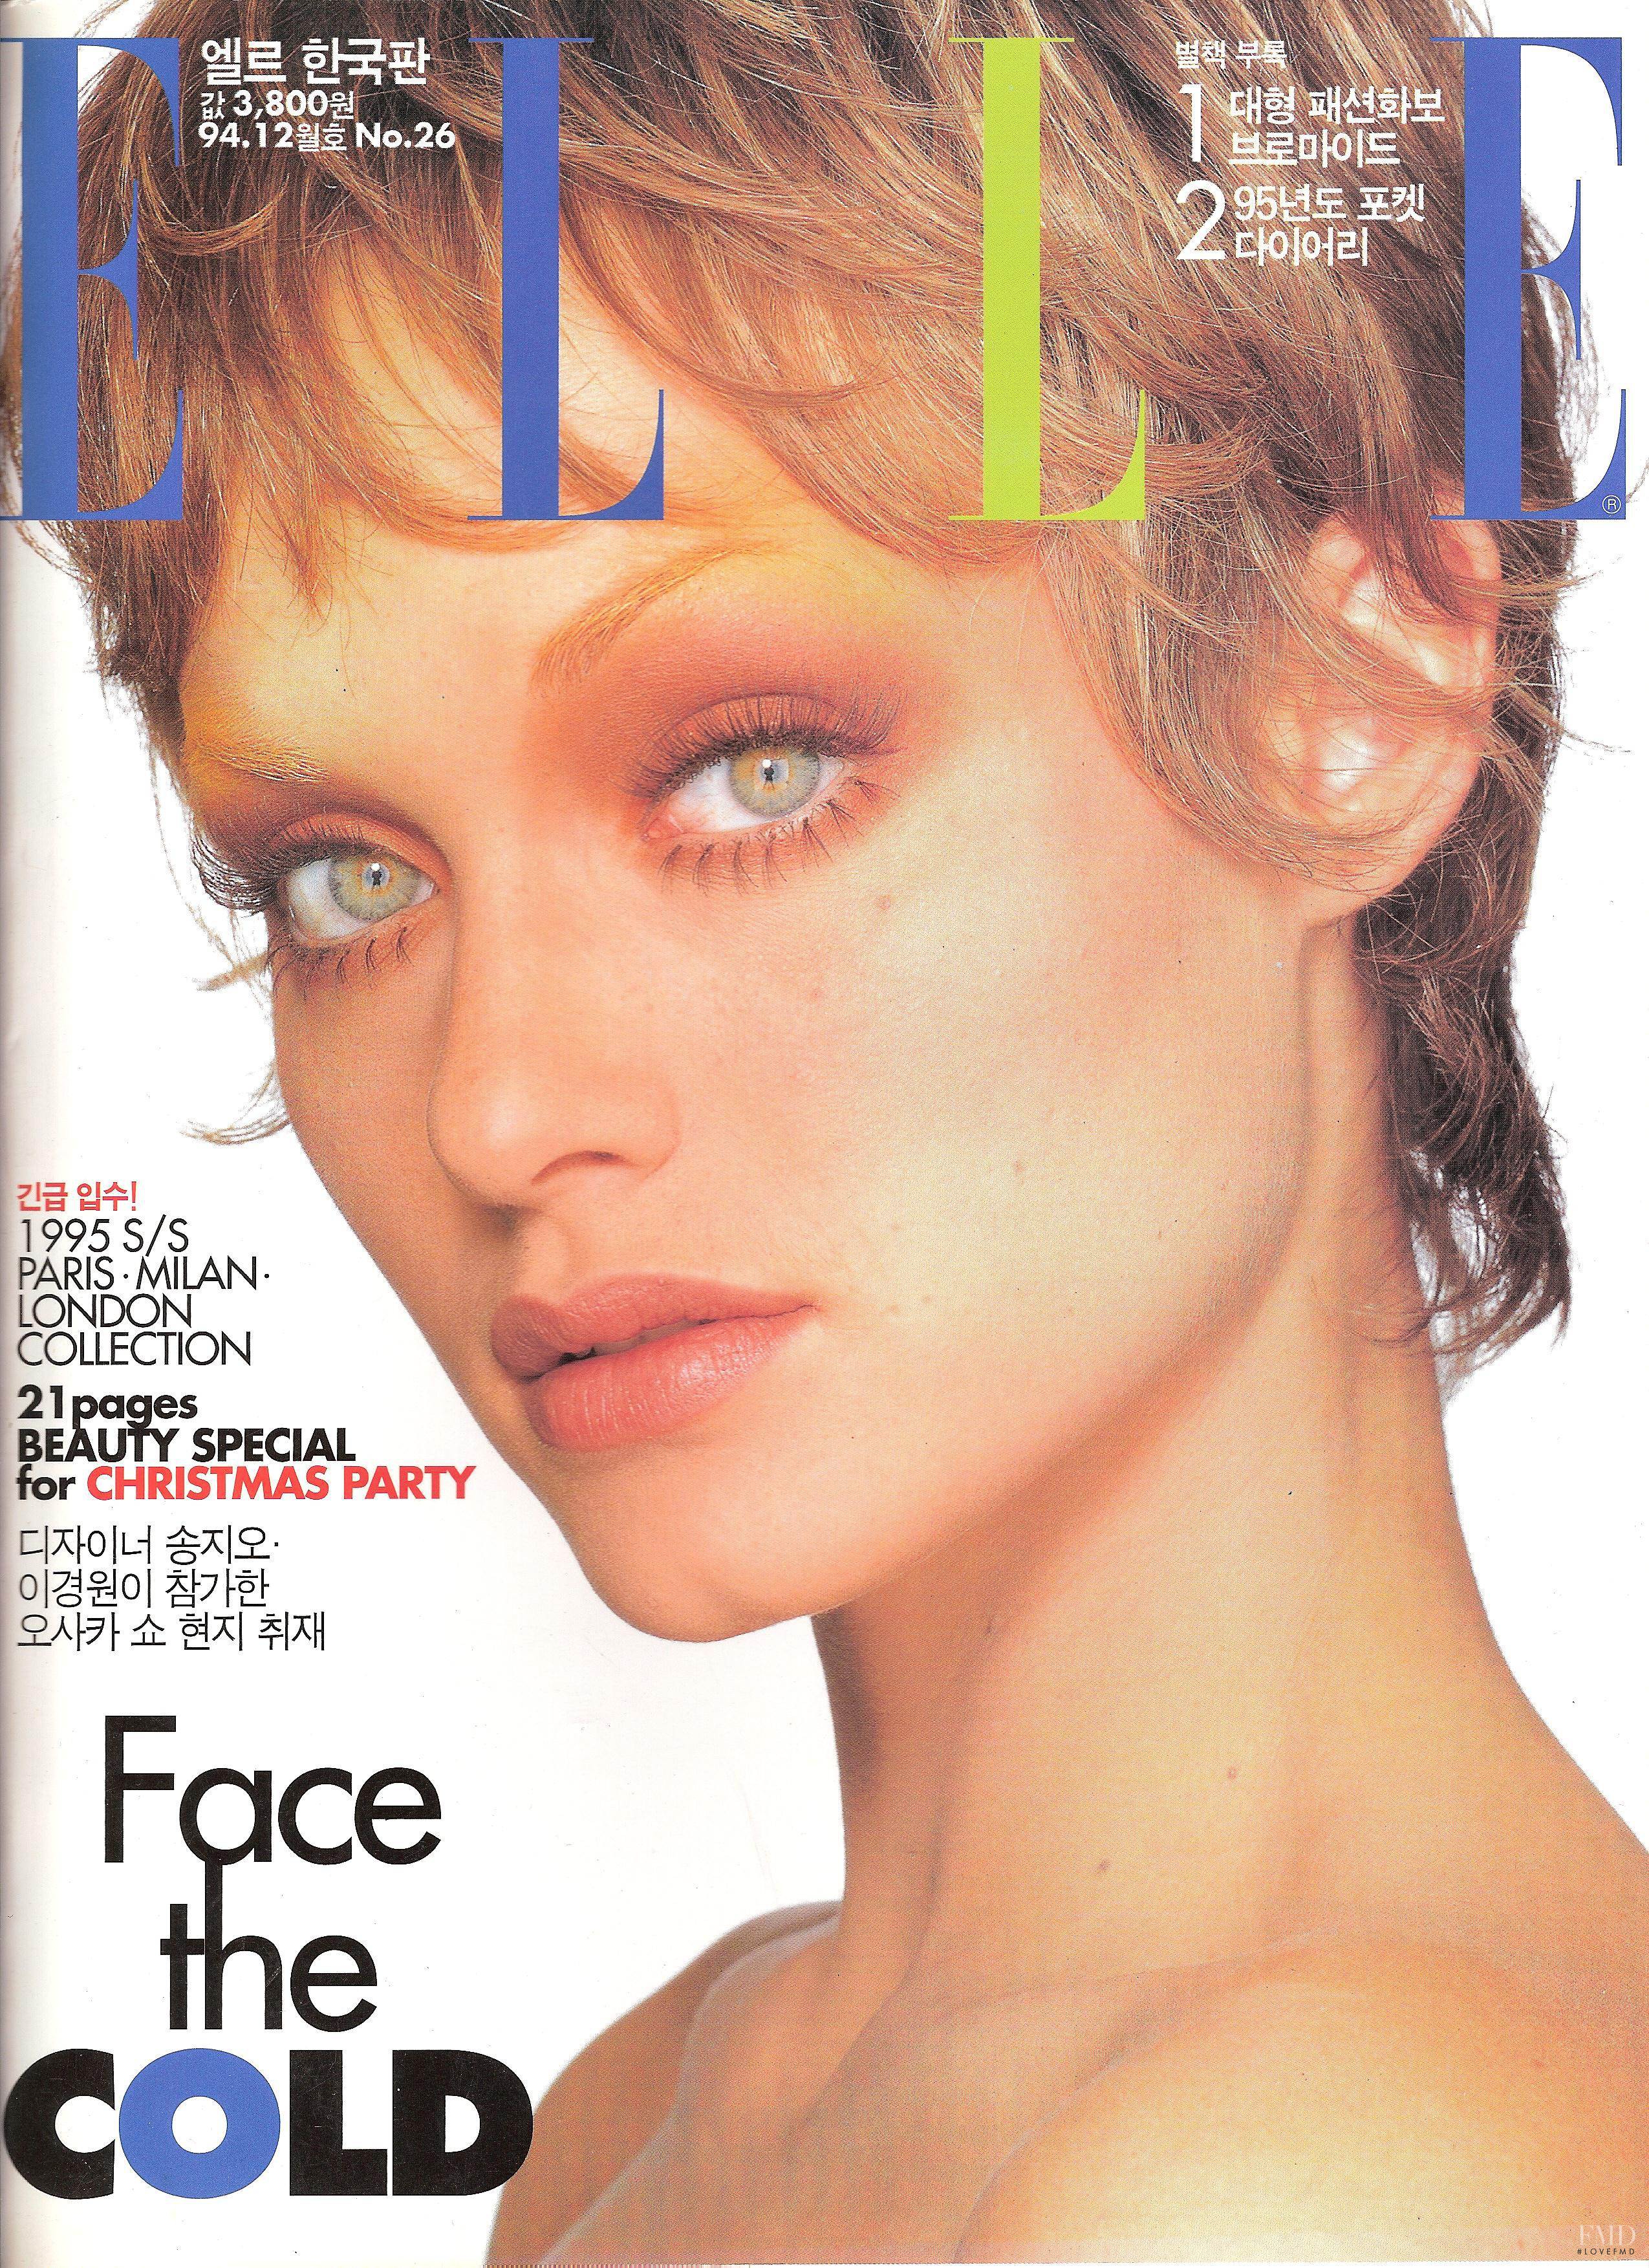 Cover of Elle Korea with Amber Valletta, December 1994 (ID:26709 ...